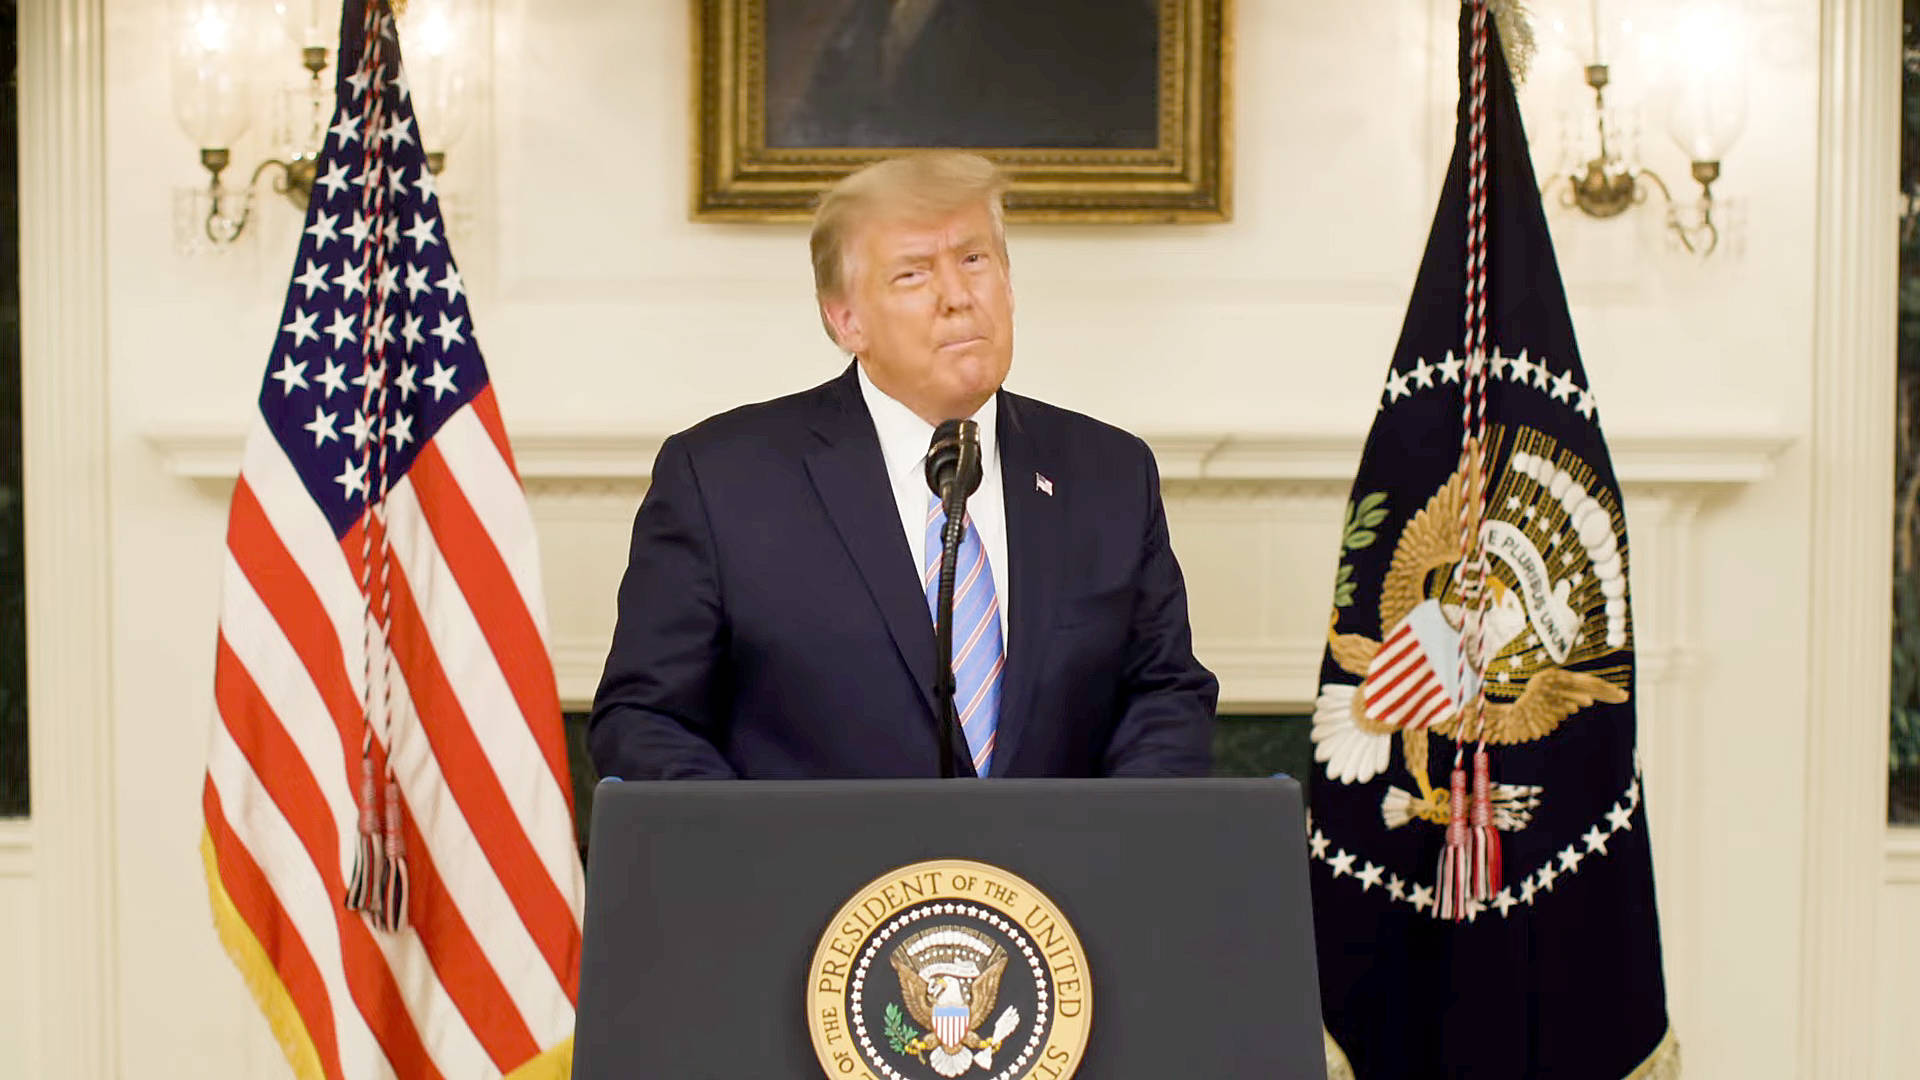 President Donald Trump addresses the nation in a video from the White House on Thursday, Jan. 7, 2021. (Screenshot)